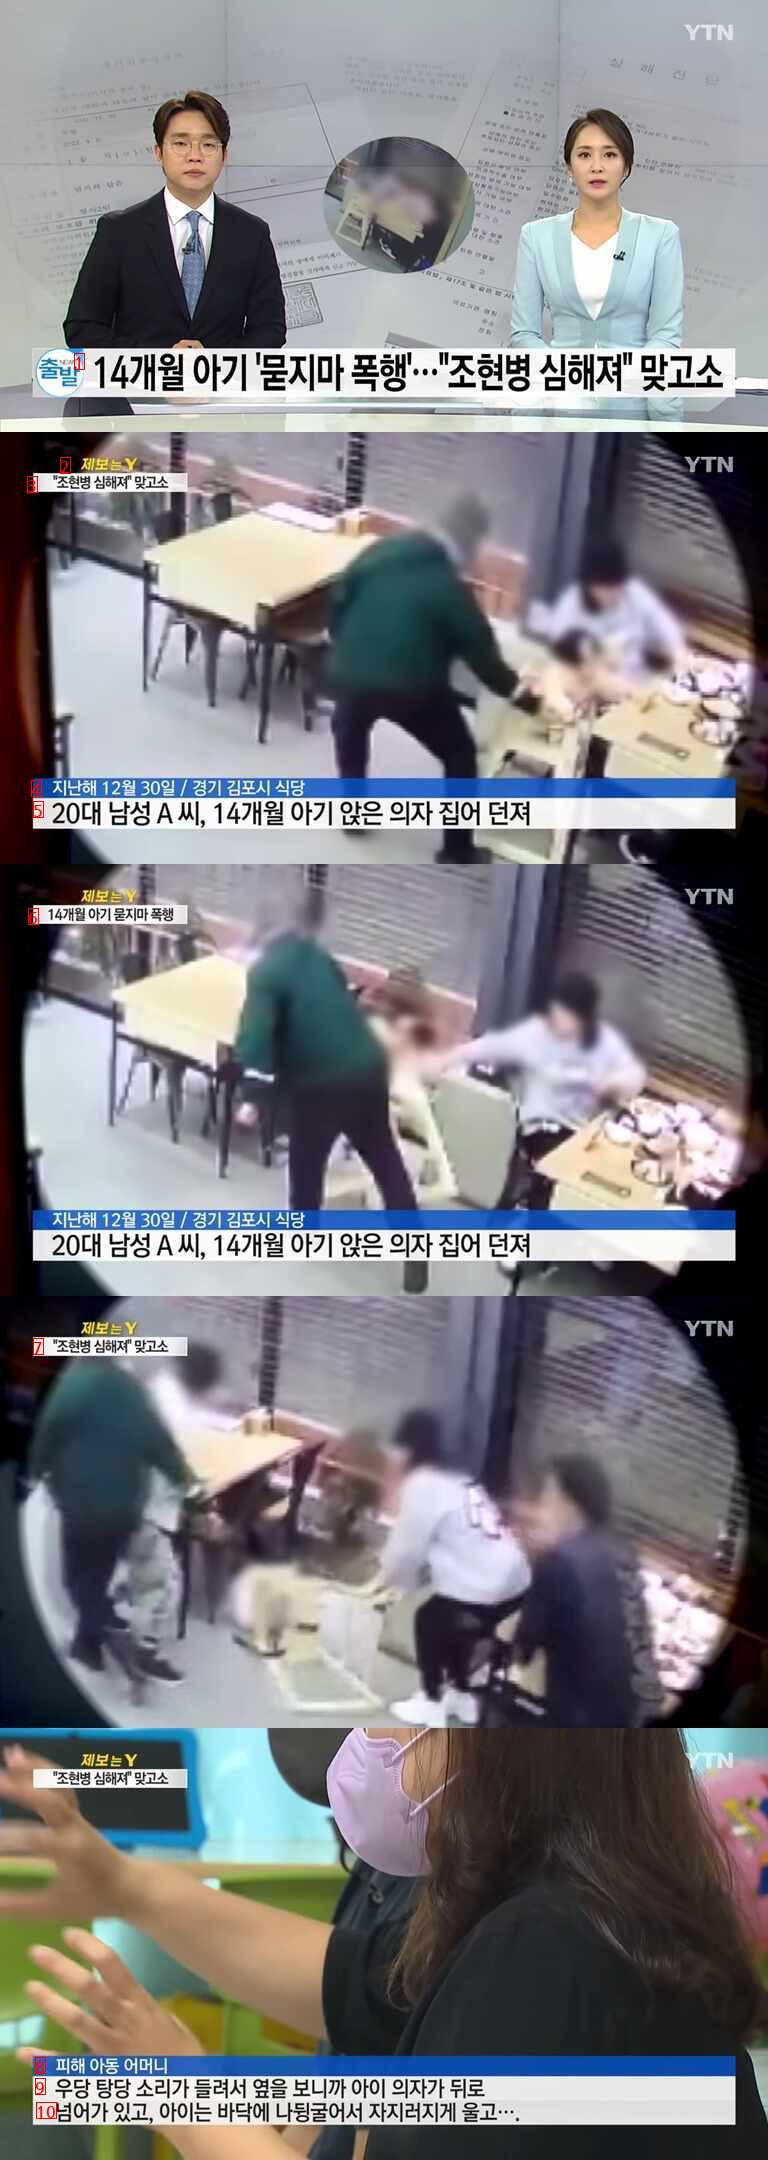 14-month-old baby, don't ask, assault.